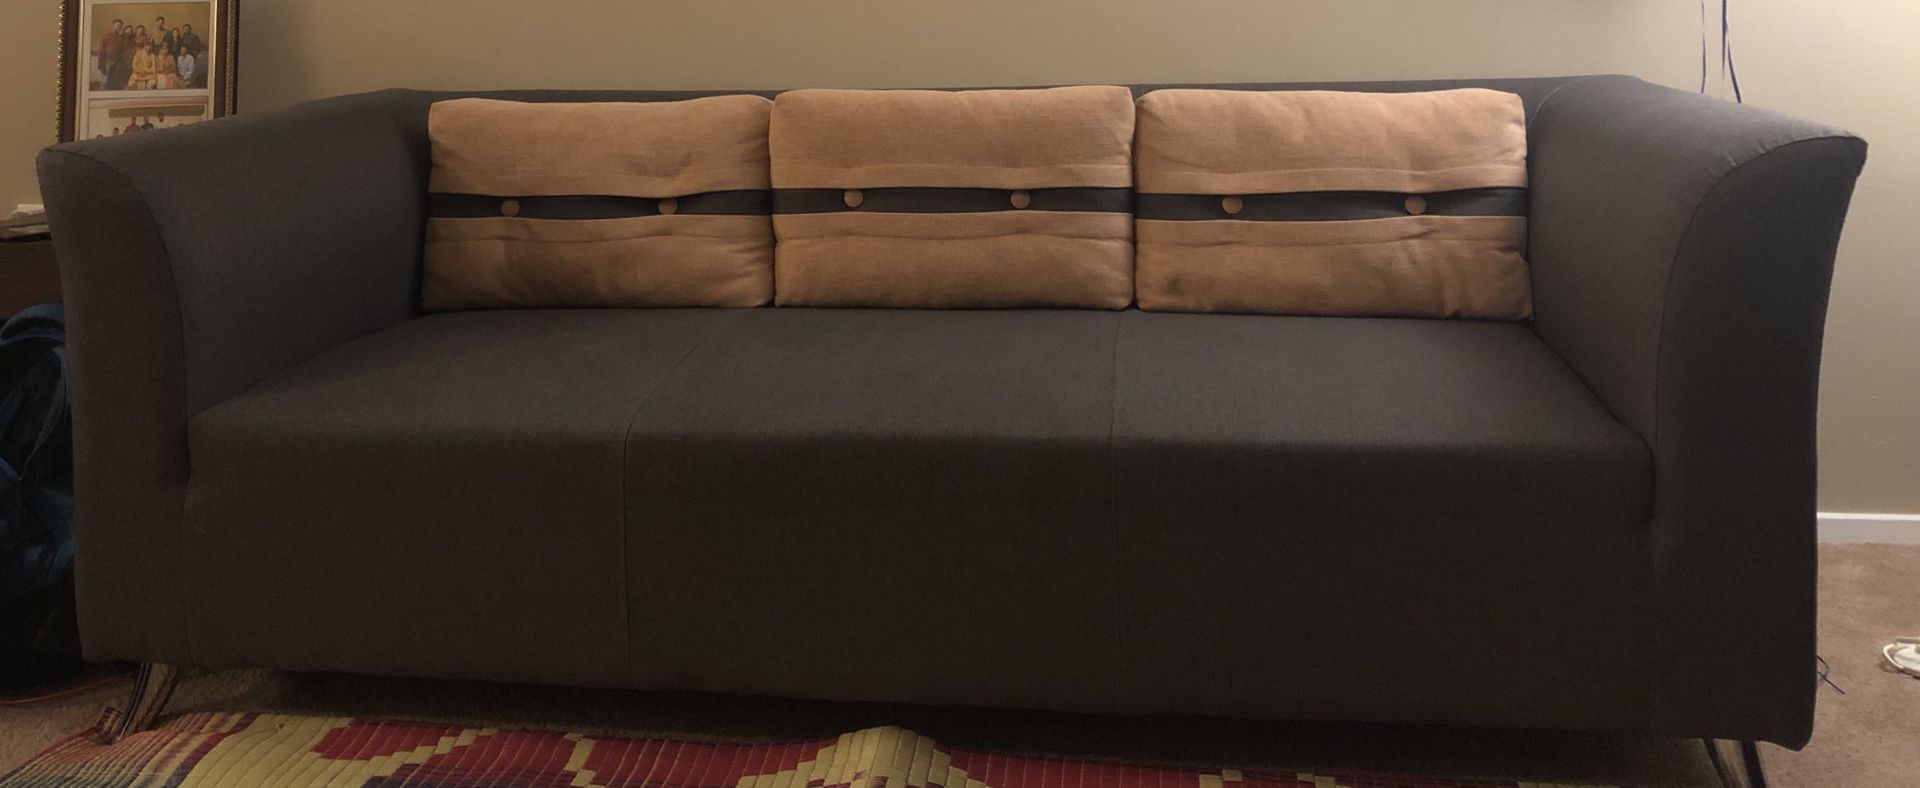 3 seater sofa with pillow